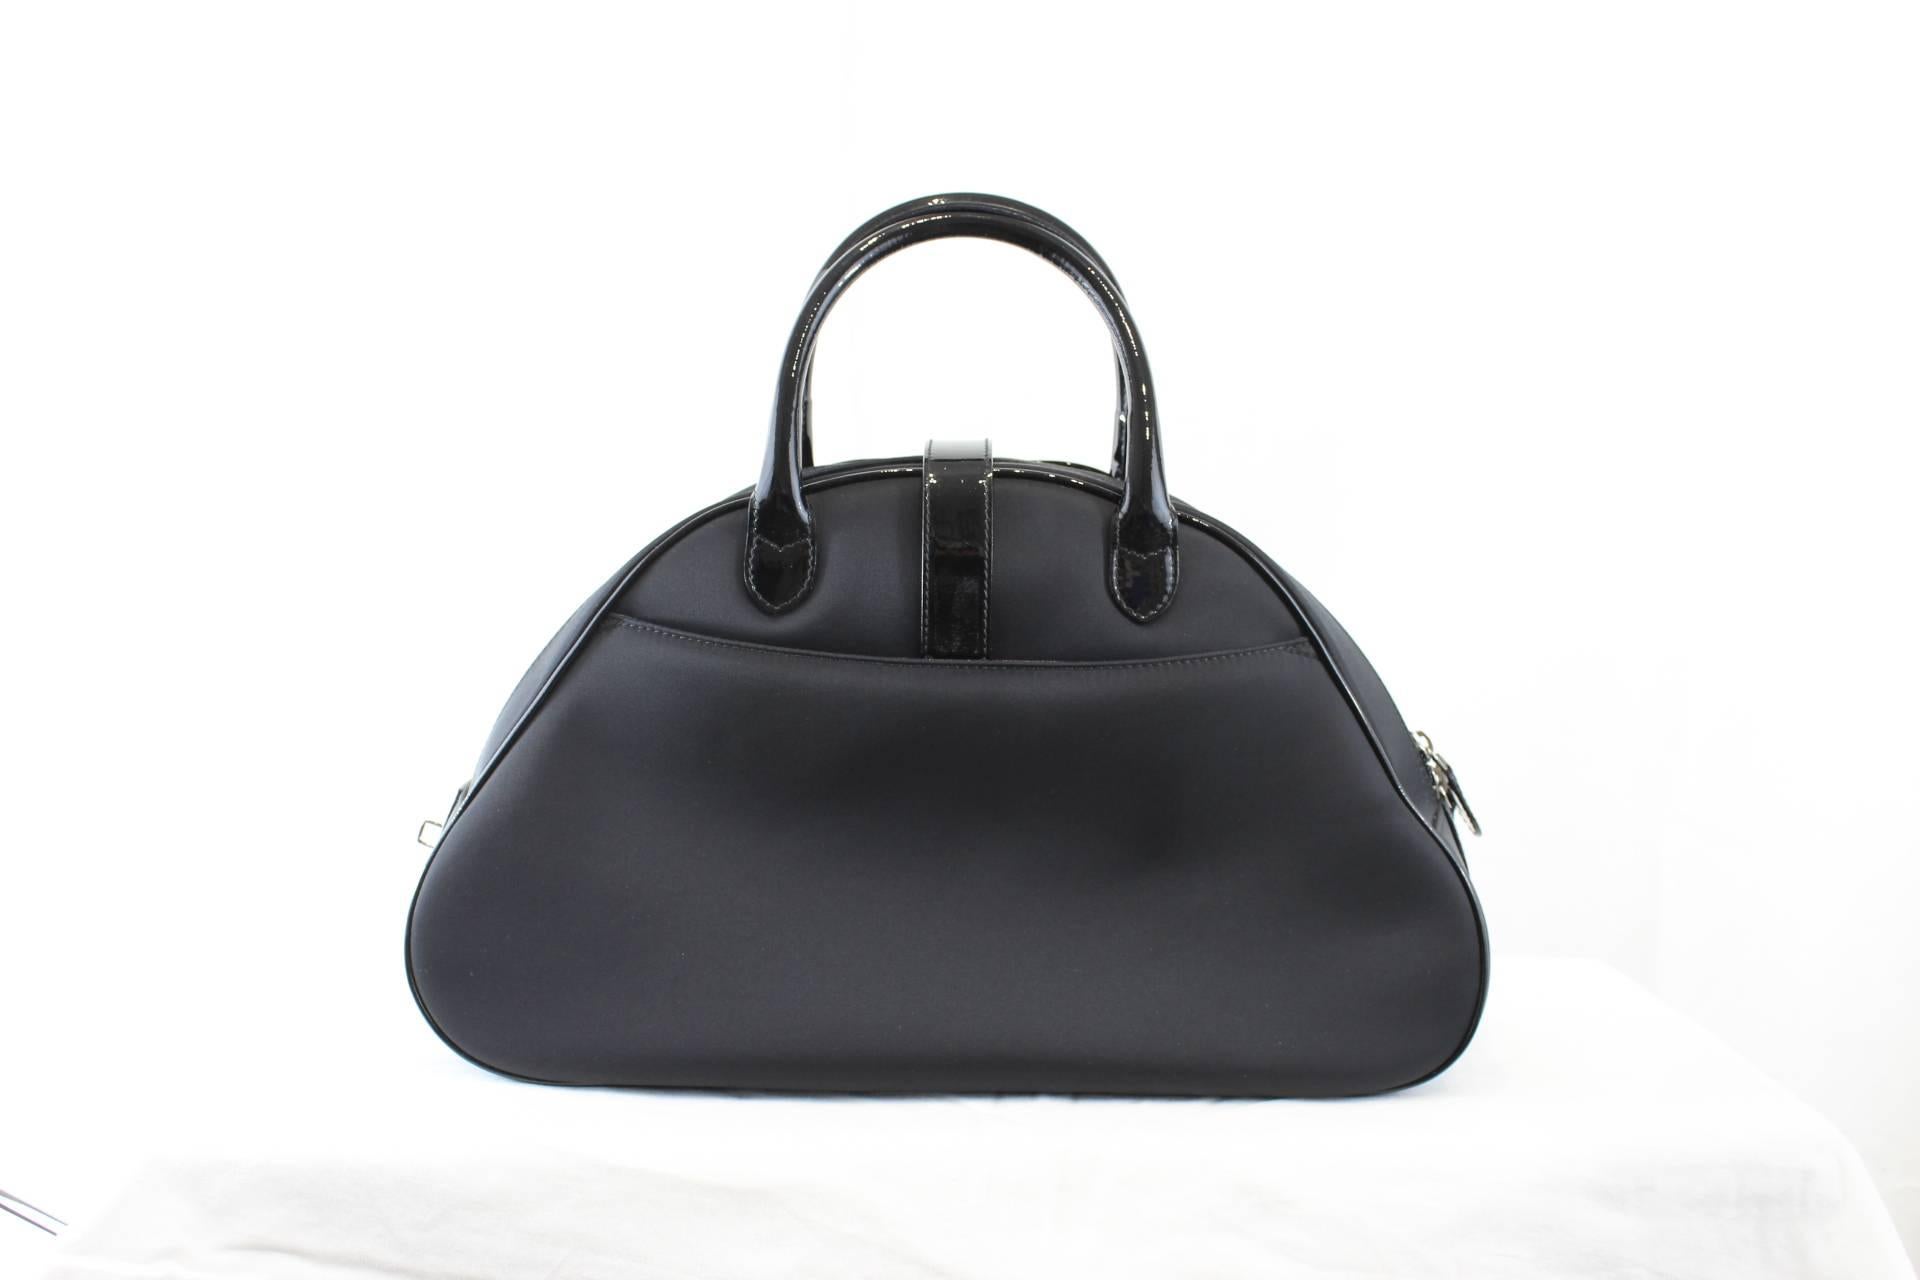 Brand new Dior black bowling bag in nylon and black patented leather. 
Like new.
Size 41x23x13 cm
